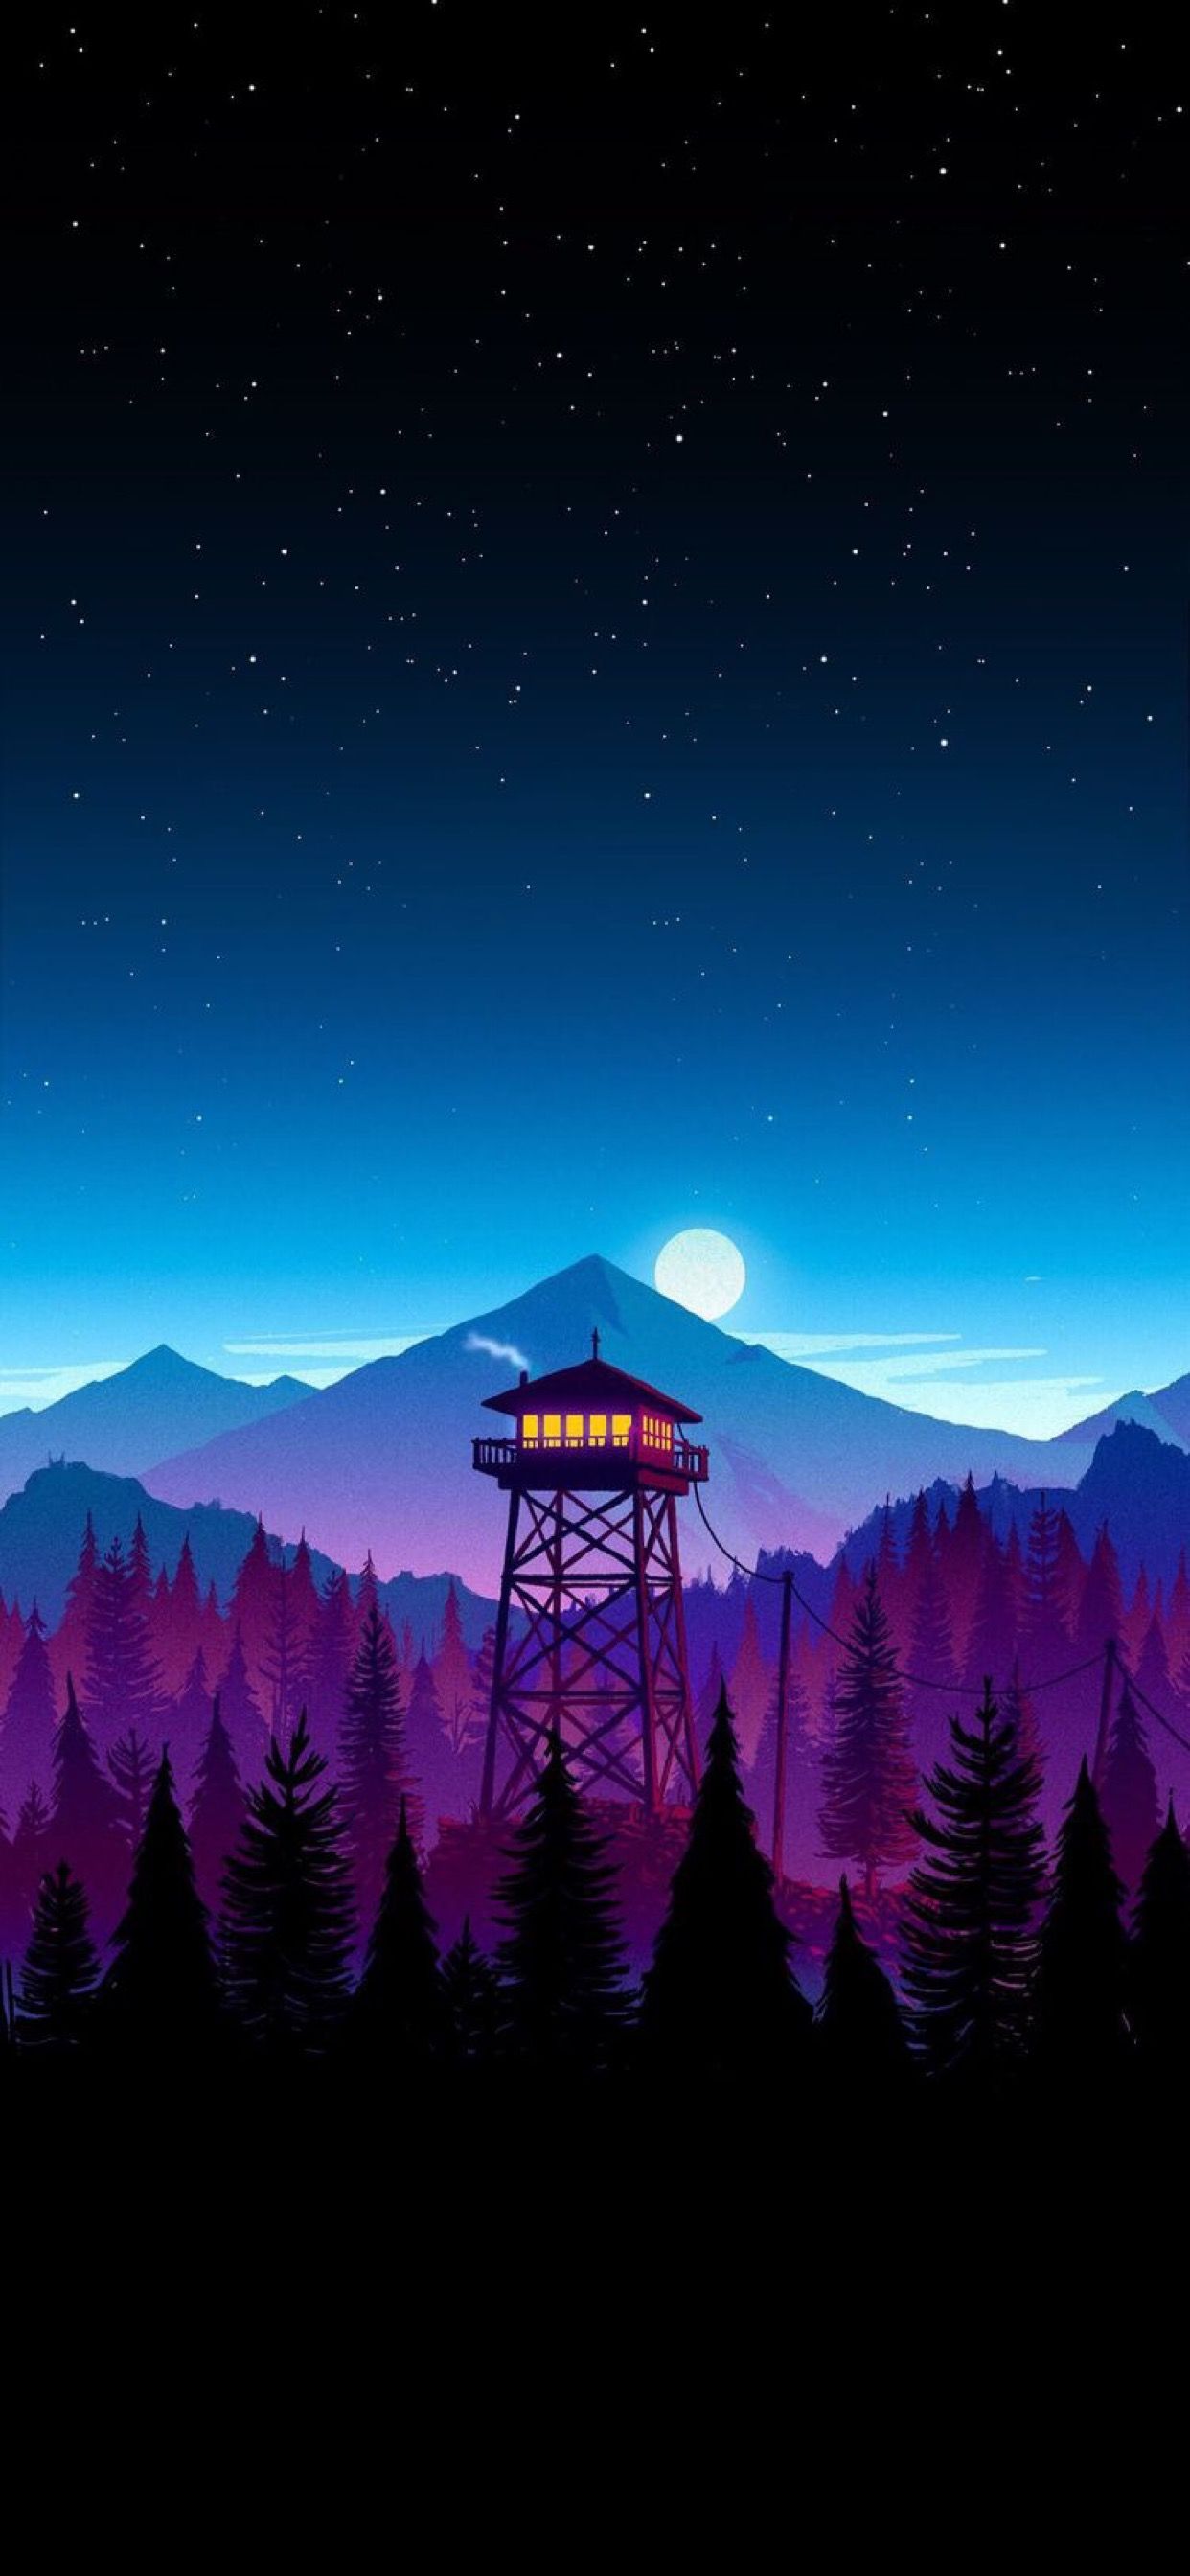 Free download Low poly Watchtower Low poly Environments in 2019